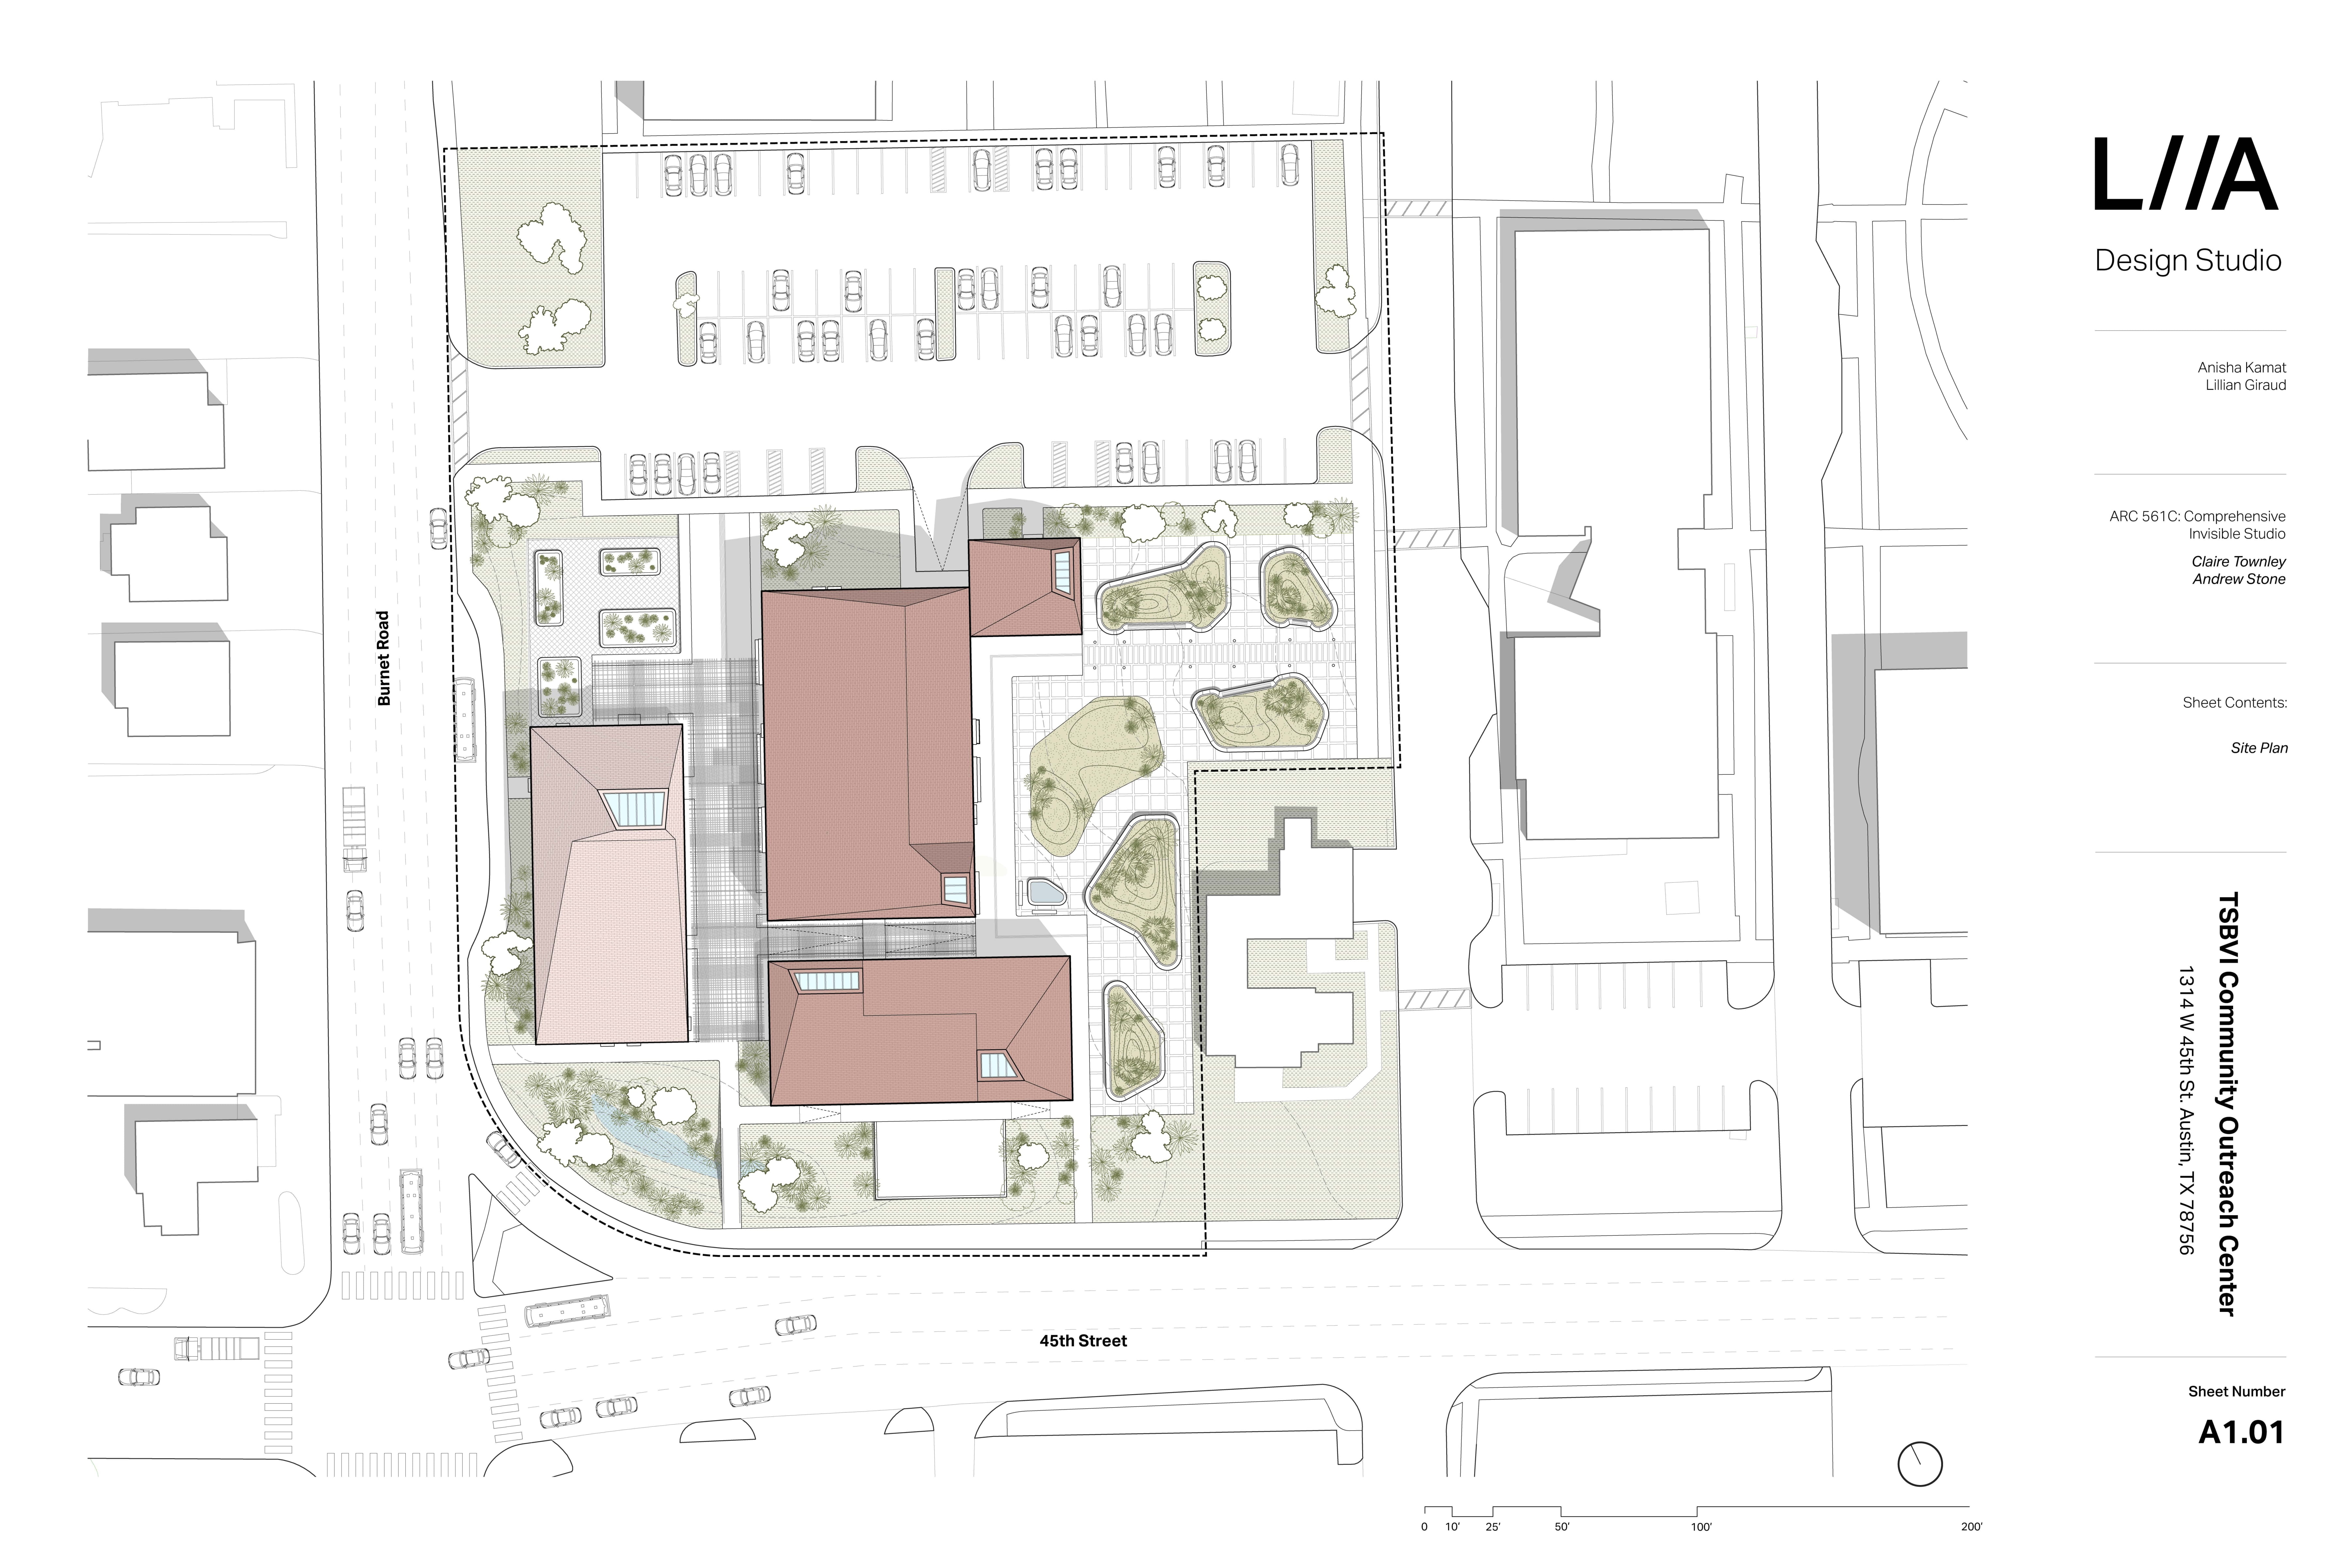 Anisha Kamat and Lillian Giraud's site plan for the Texas School for the Blind and Visually Impaired